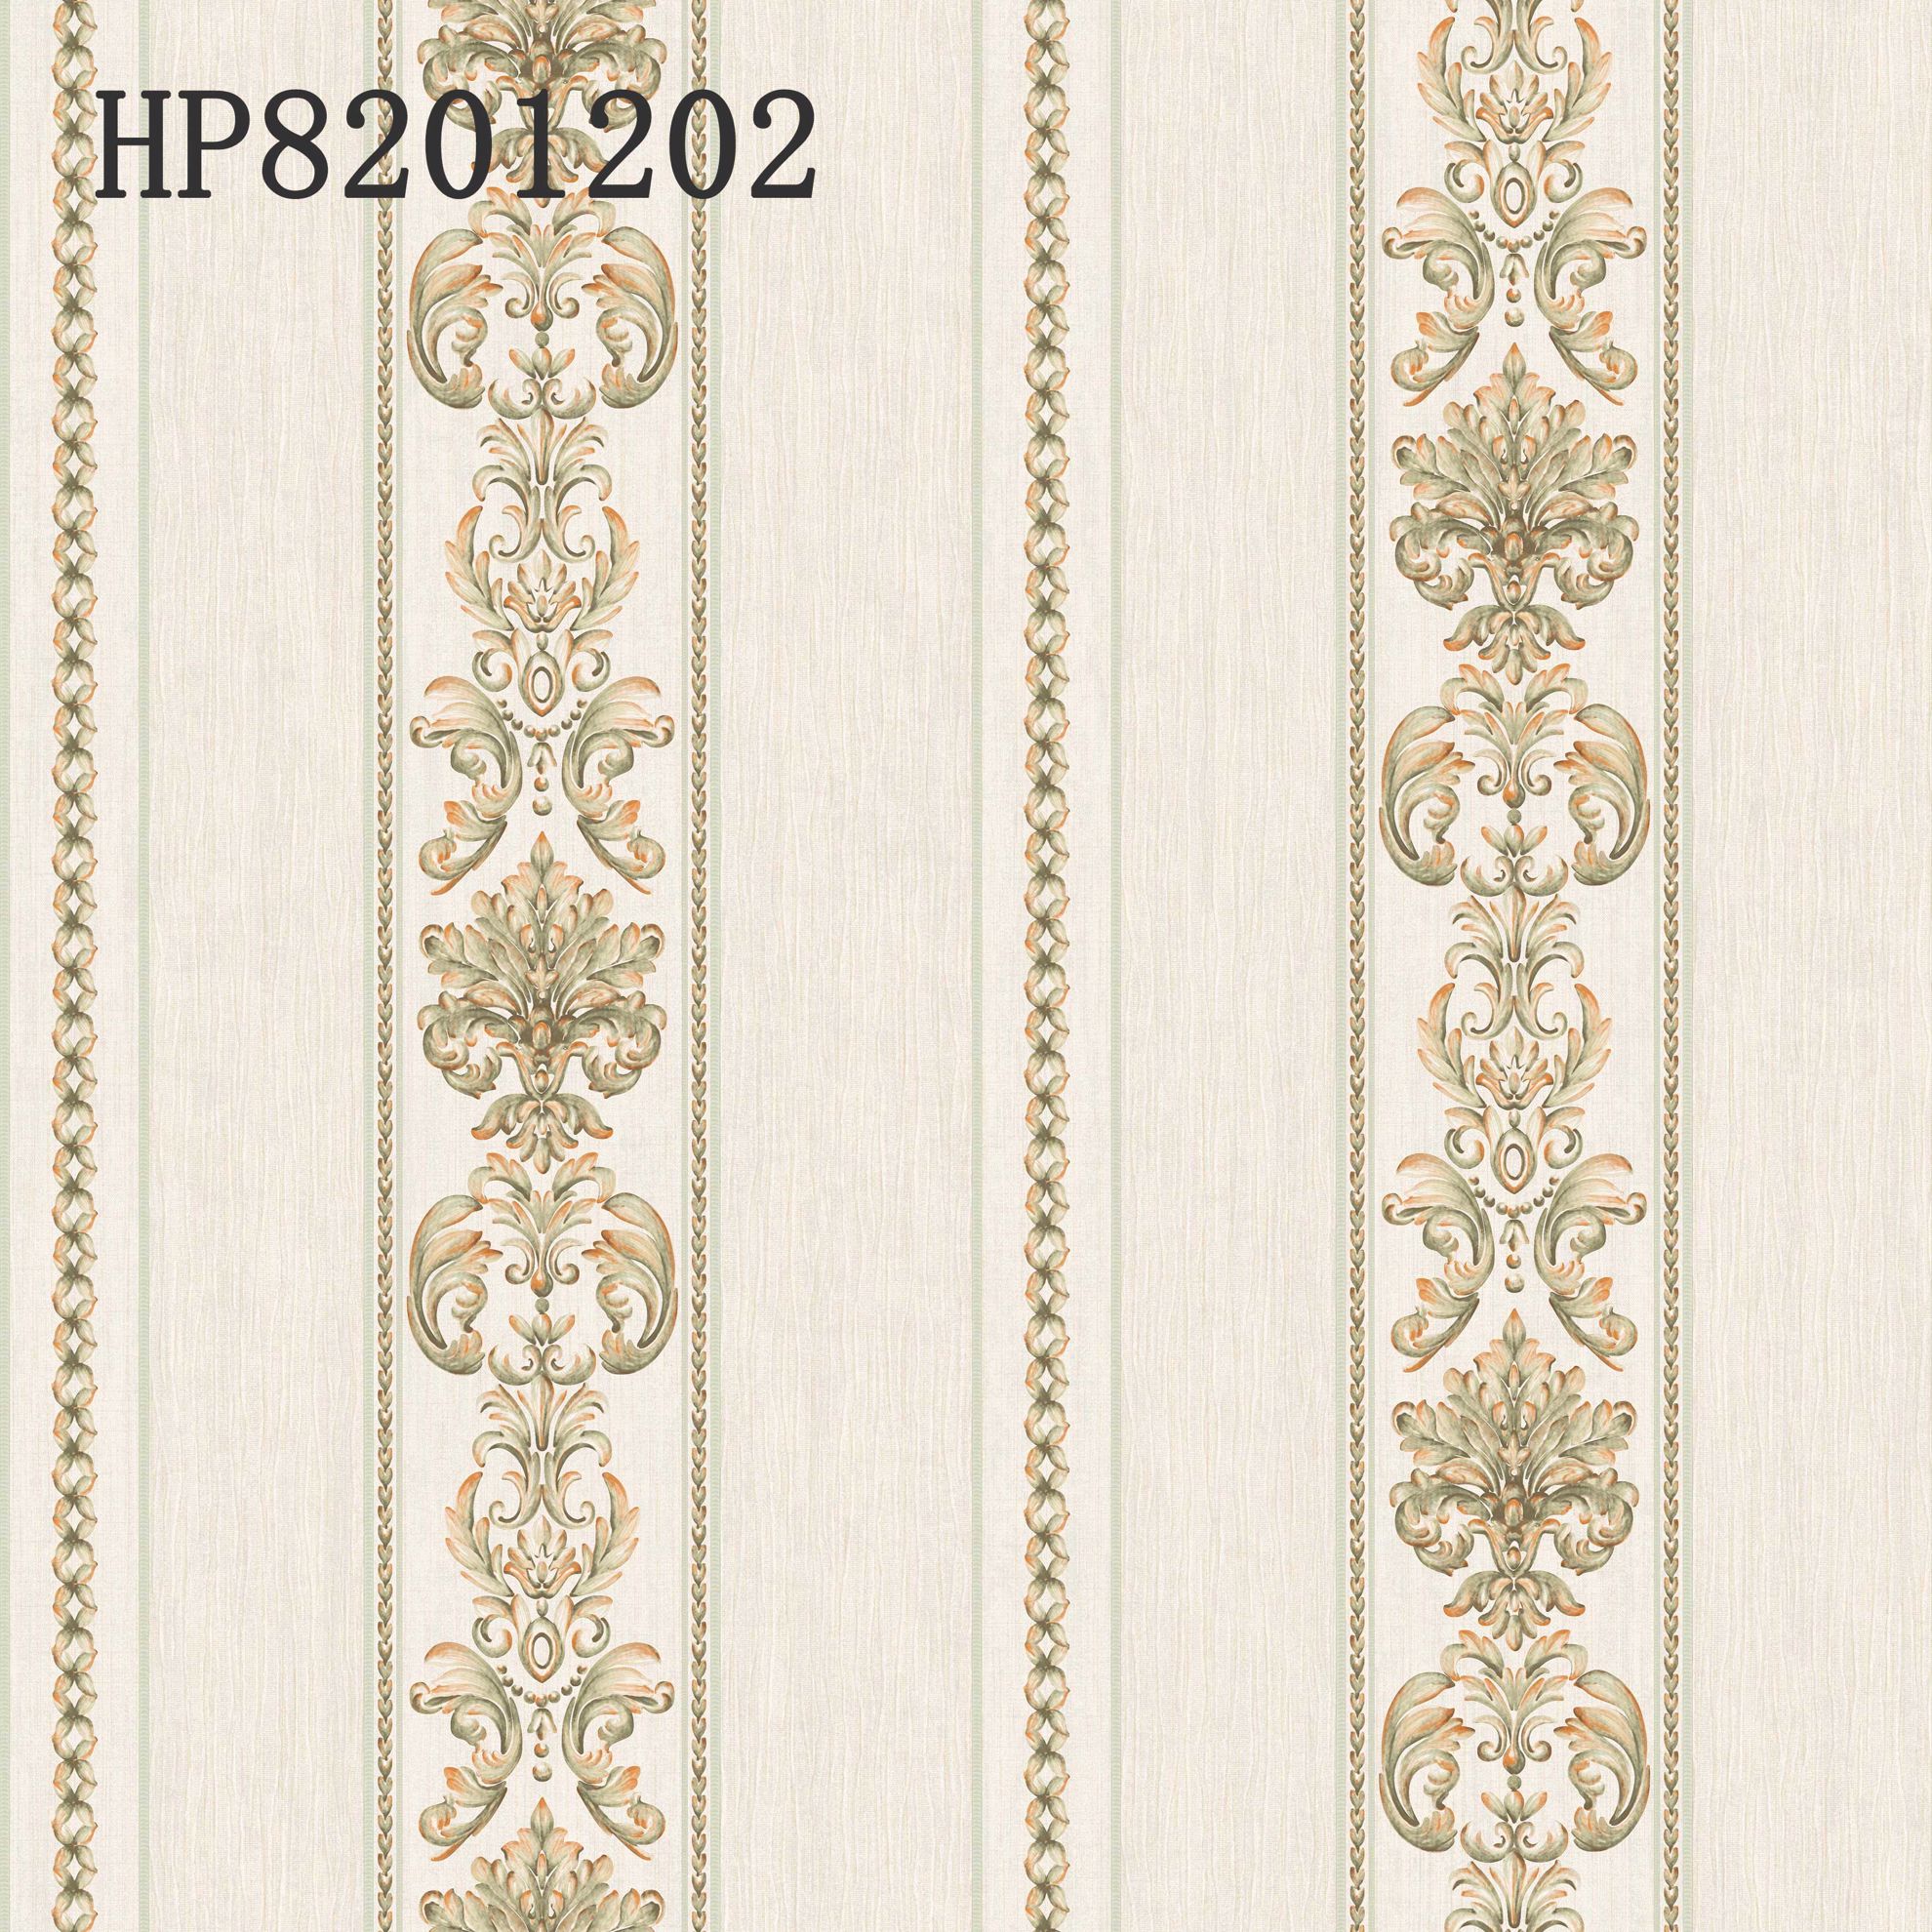 3d Wallpaper For Home Decoration HP82001202